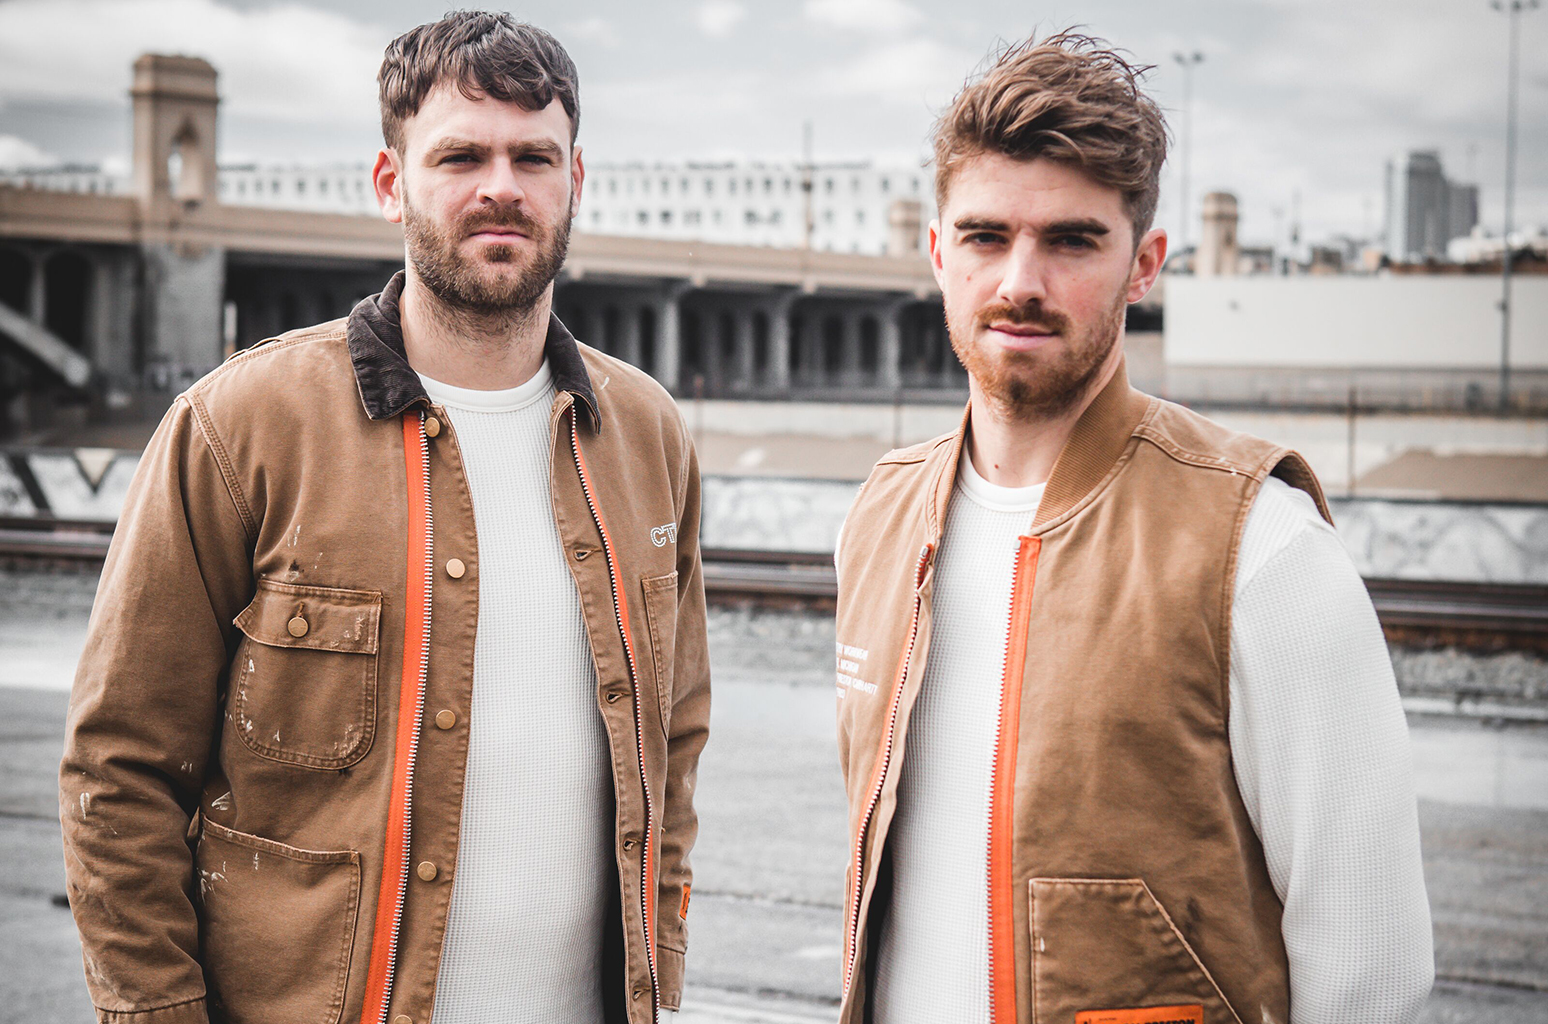 'Joy' to the World: The Chainsmokers Debut at No. 1 on Top Dance/Electronic Albums Chart - www.billboard.com